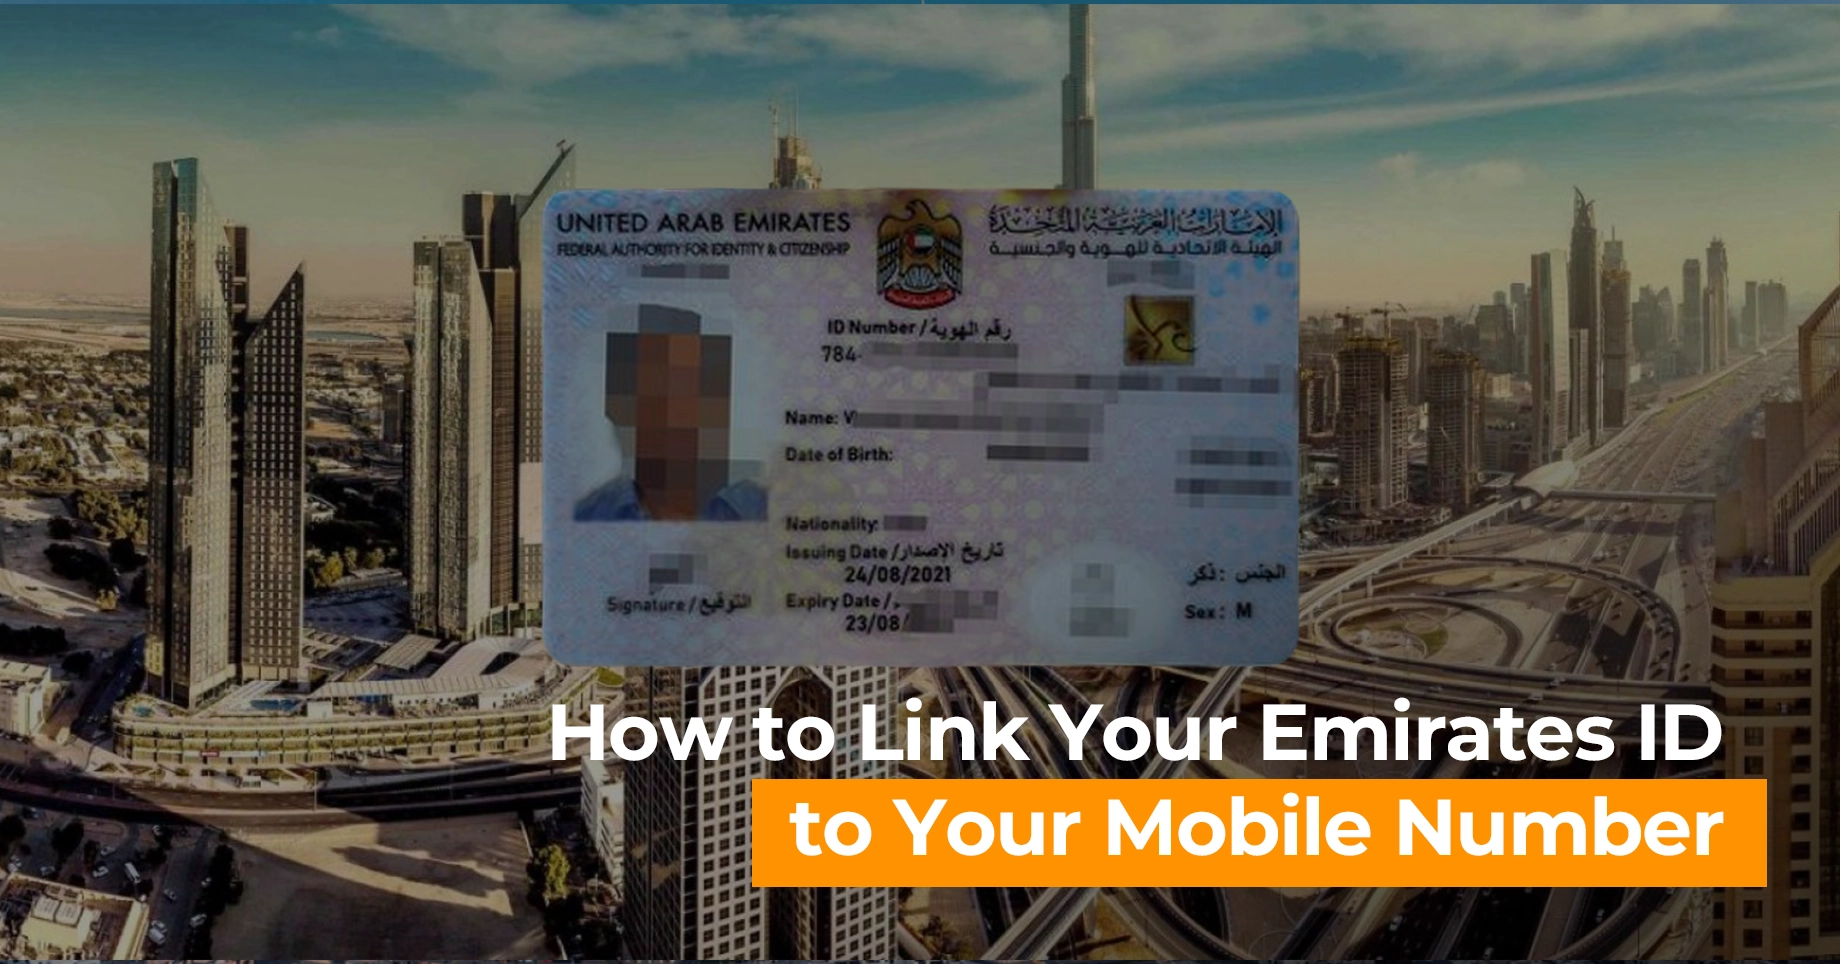 How to Link Your Emirates ID to Your Mobile Number